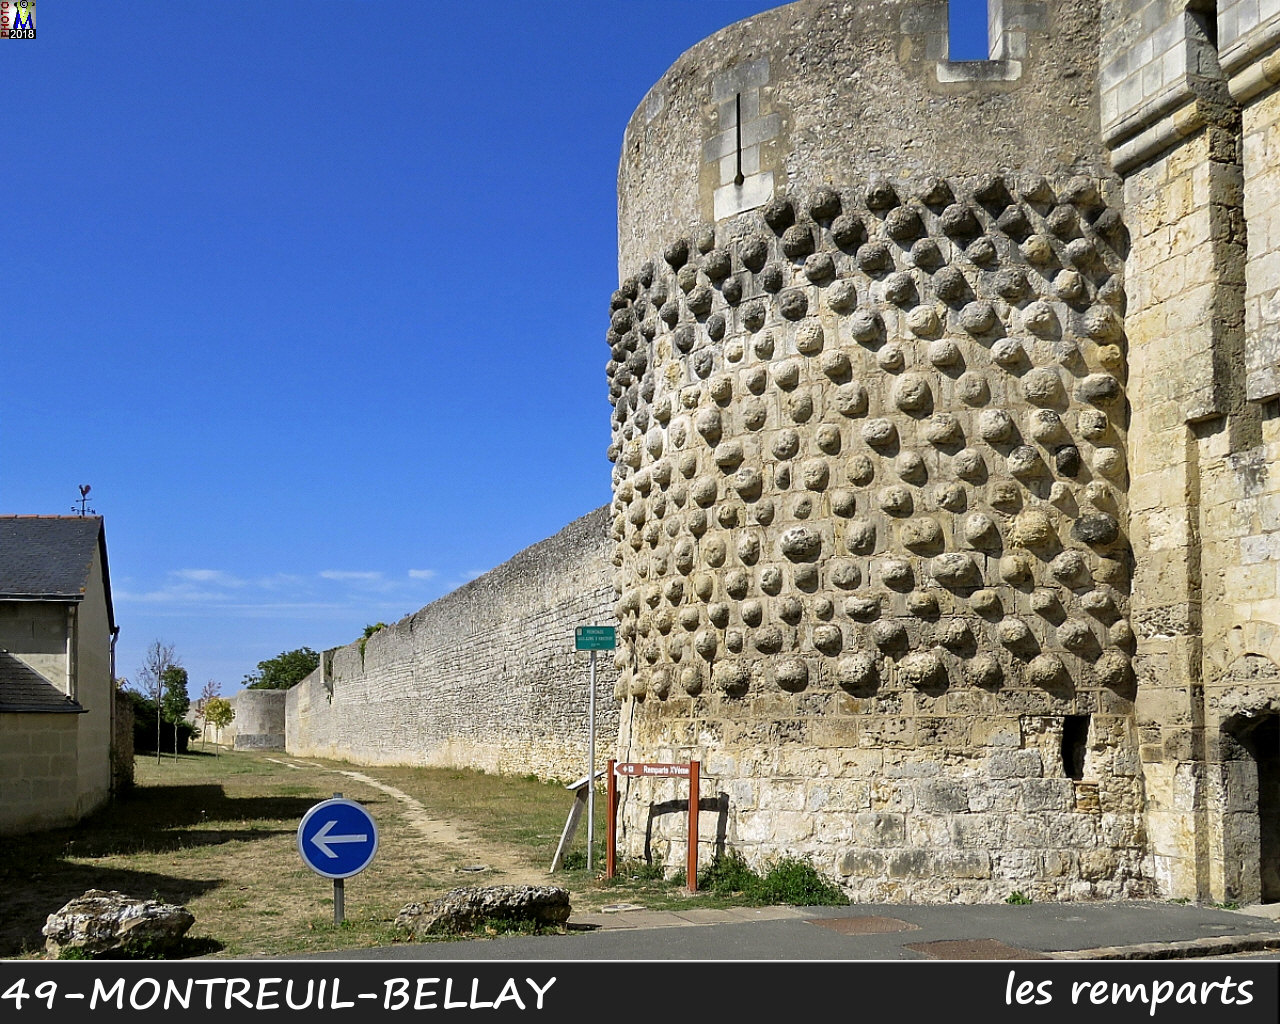 49MONTREUIL-BELLAY_remparts_1000.jpg